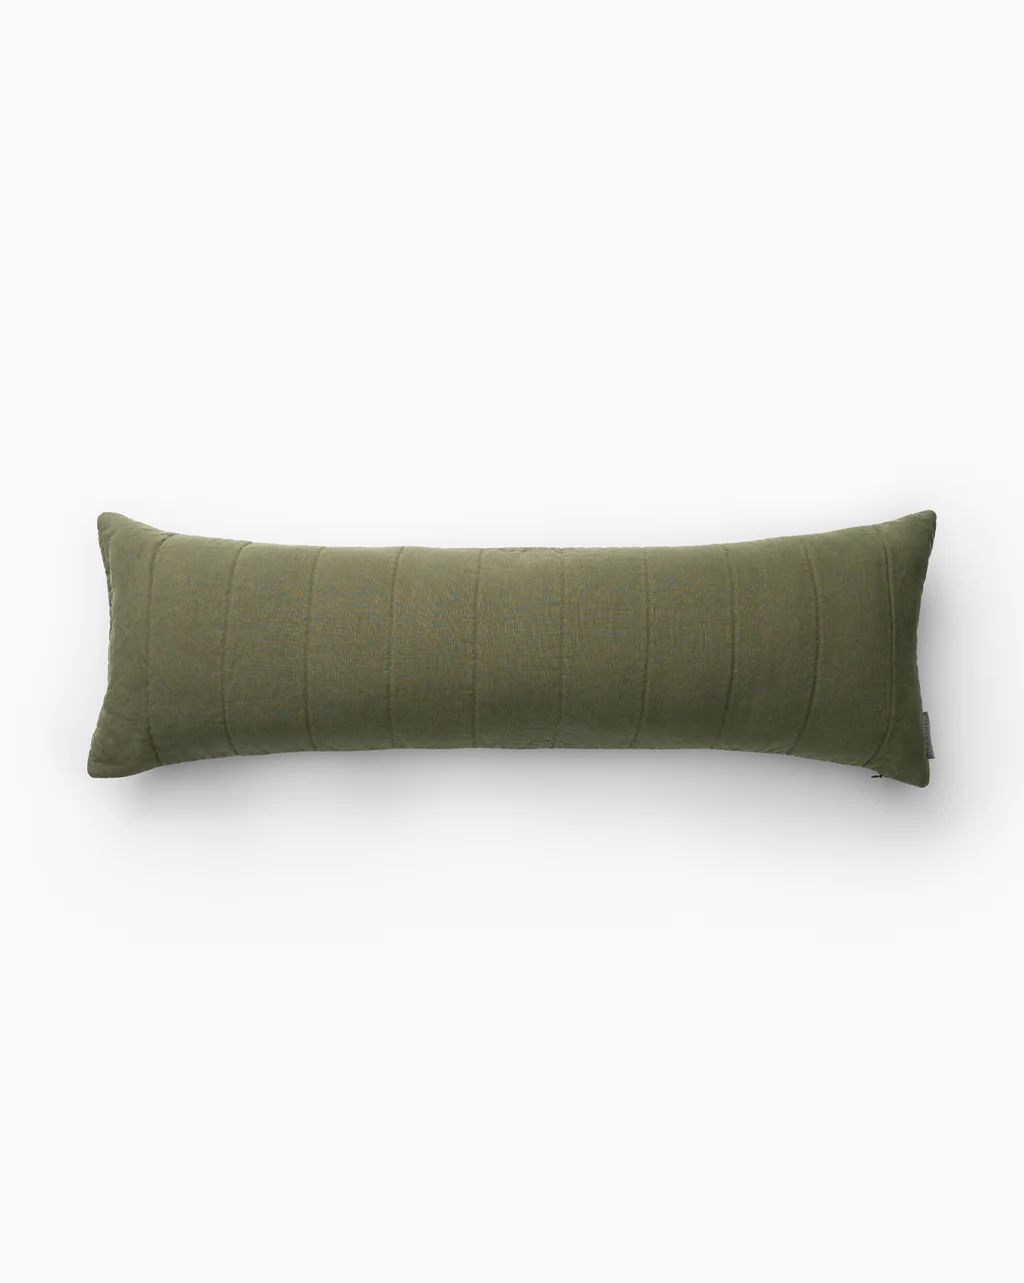 Noah Channel Pillow Cover | McGee & Co.